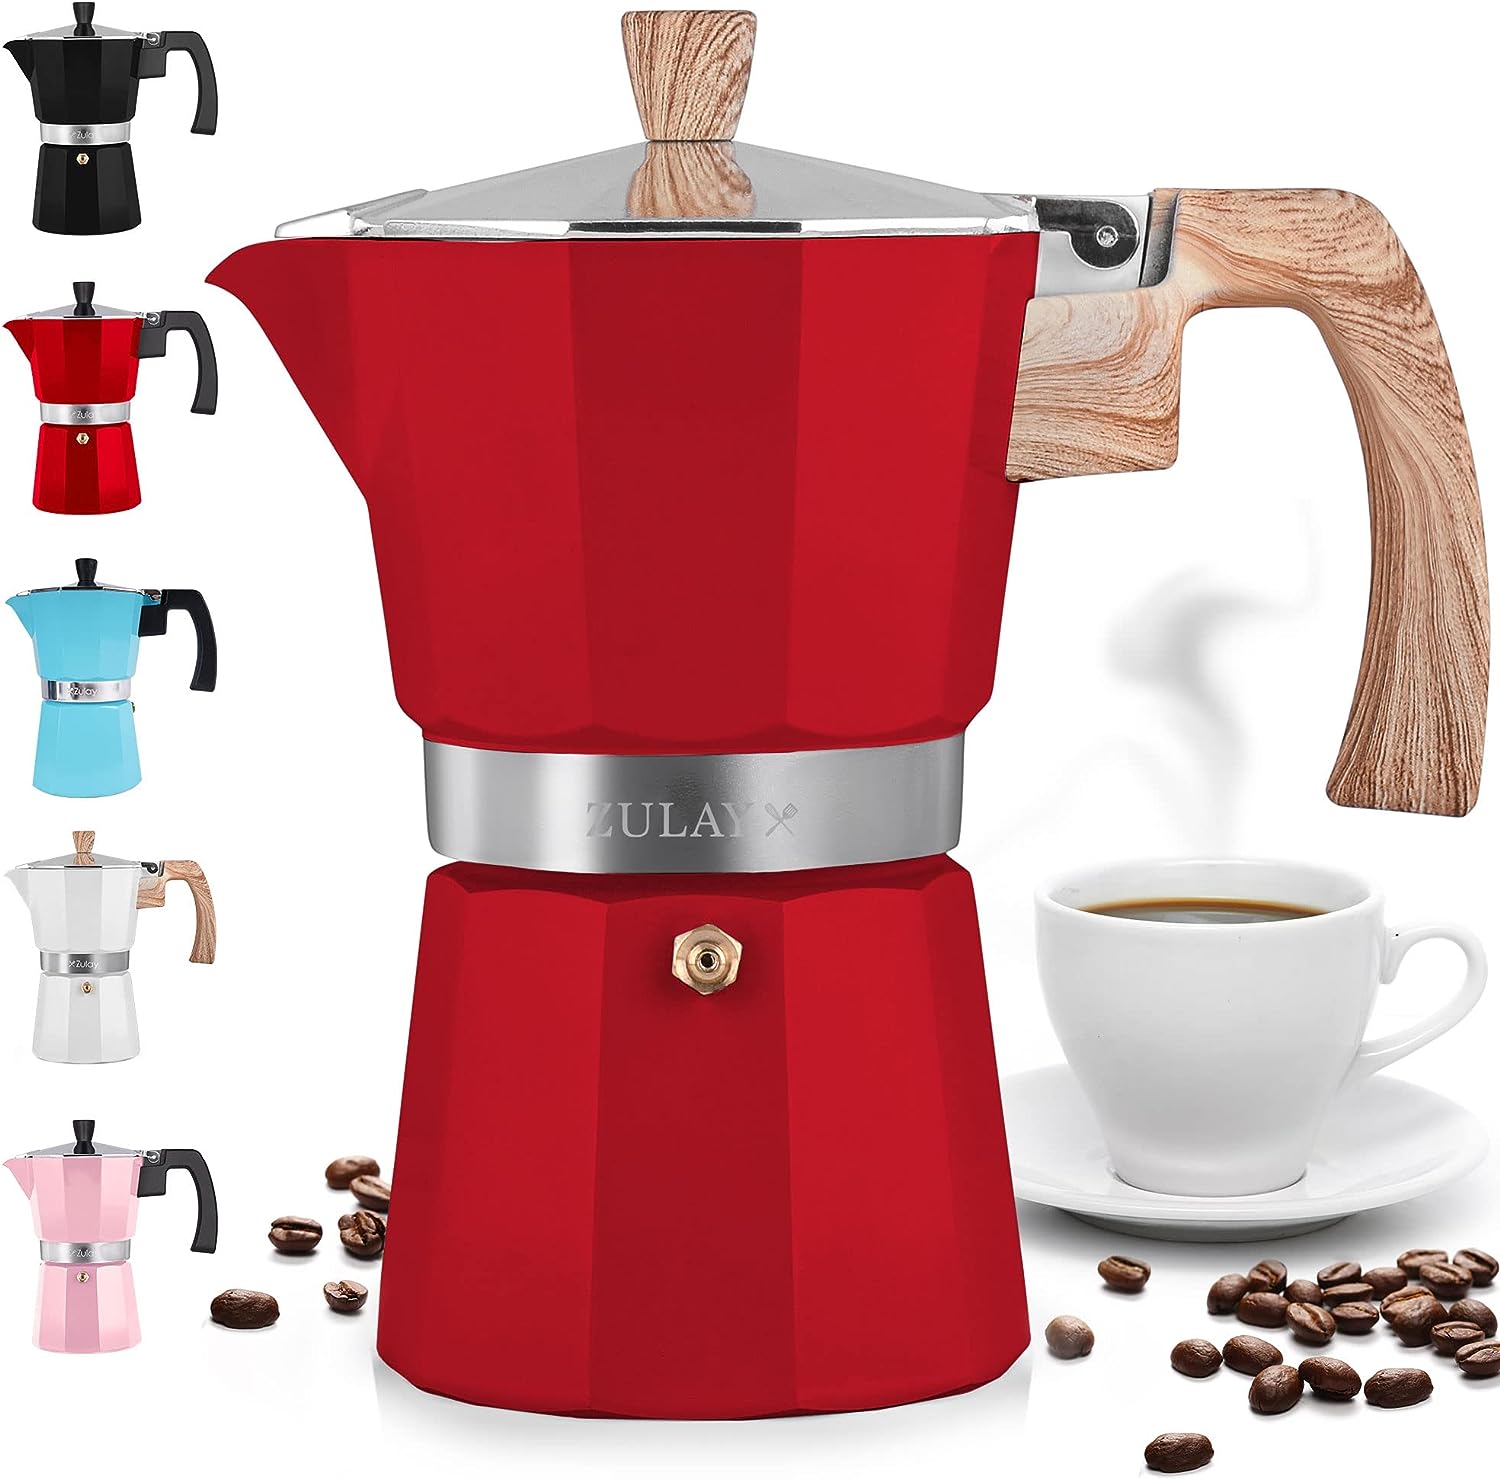 Zulay Classic Stovetop Espresso Maker Review